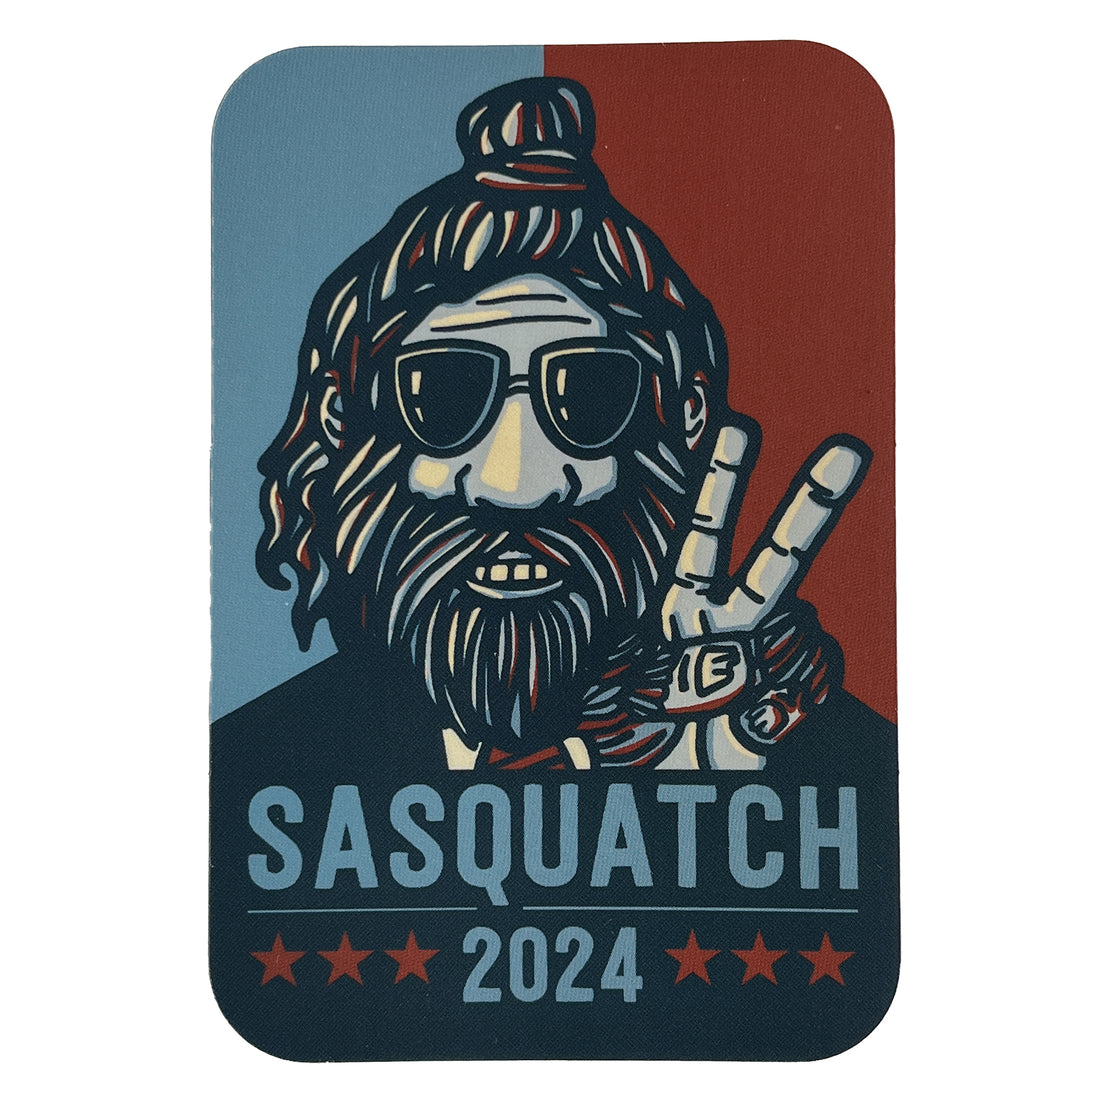 Sasquatch 2024 Sticker: contour drawing of big foot in a suit making a piece sign. Red, off-white, and blue color palette. Text: Sasquatch 2024 